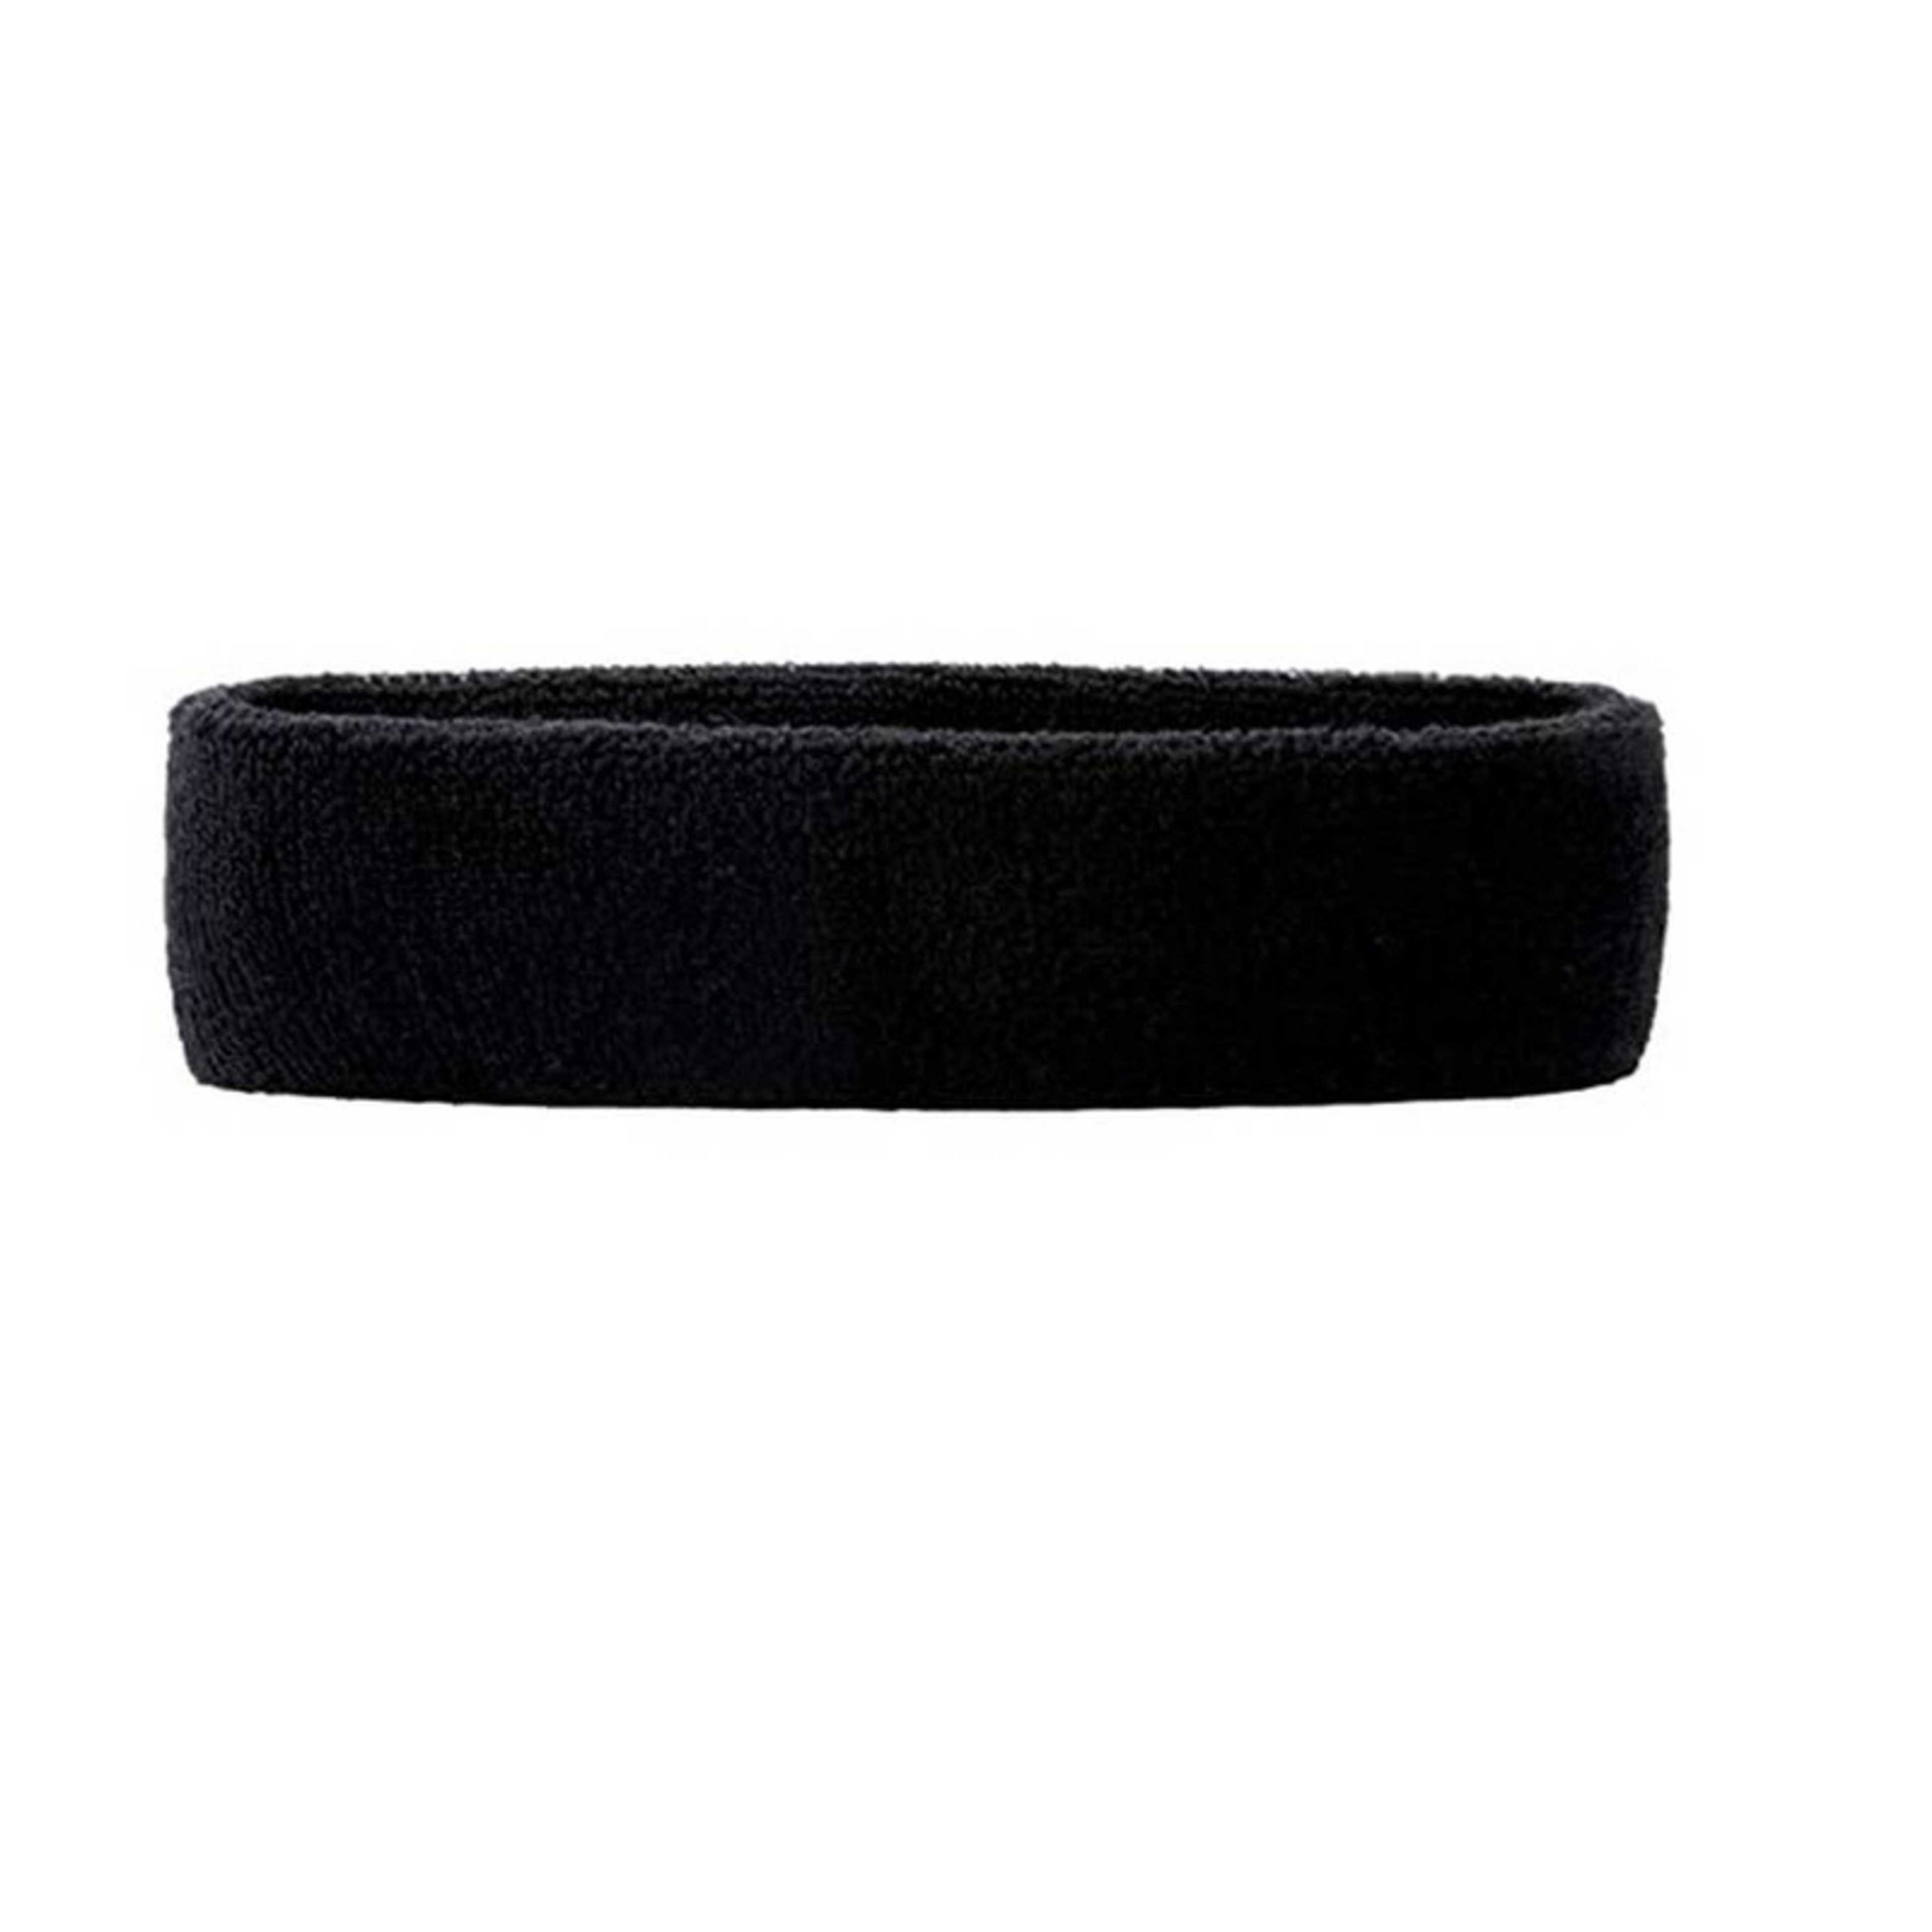 Best Quality,1 Piece band , Sports Headband for Athletic Men and Women – Black